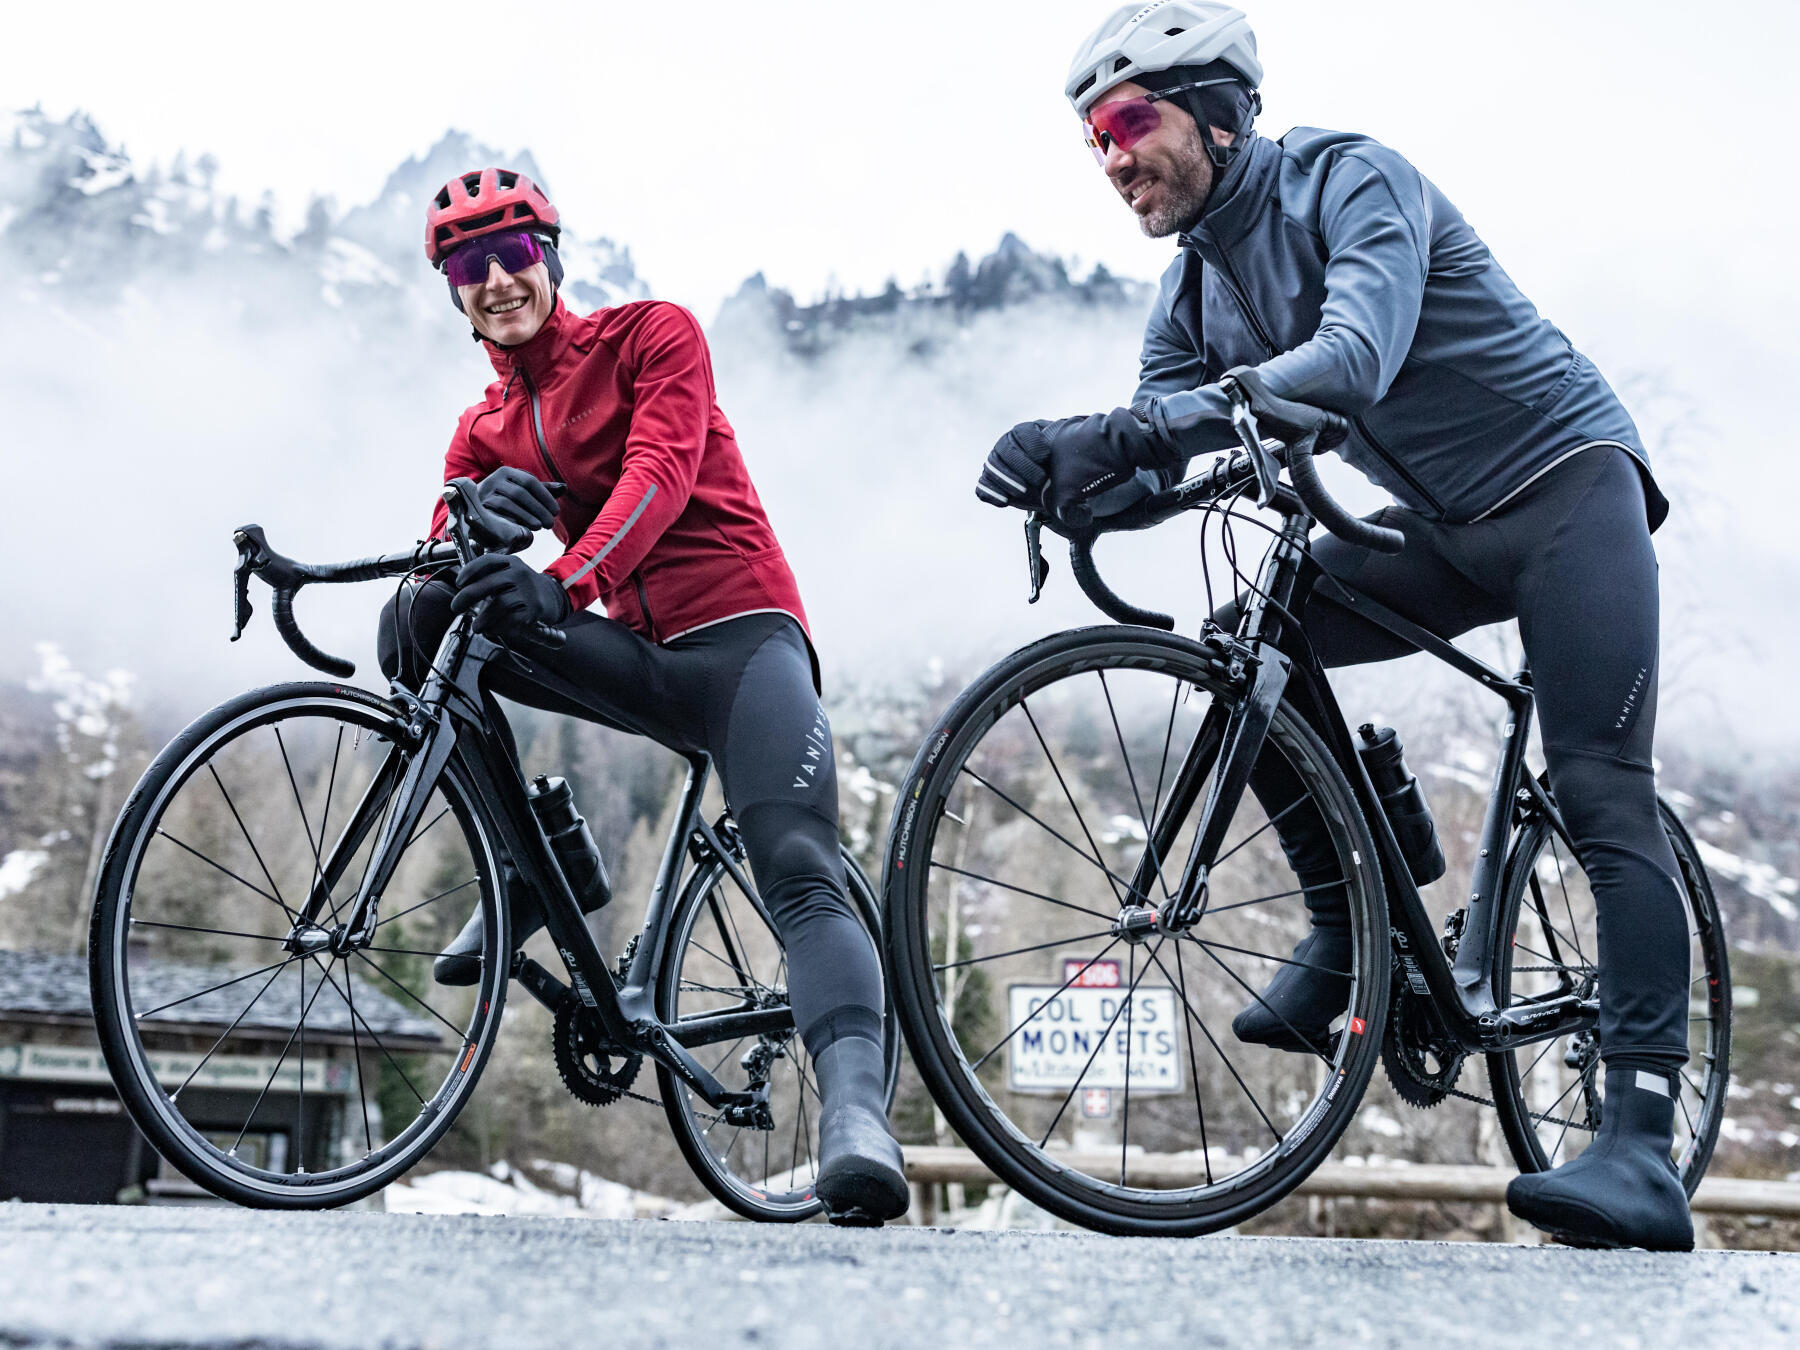 Cycling in winter: tips from a pro